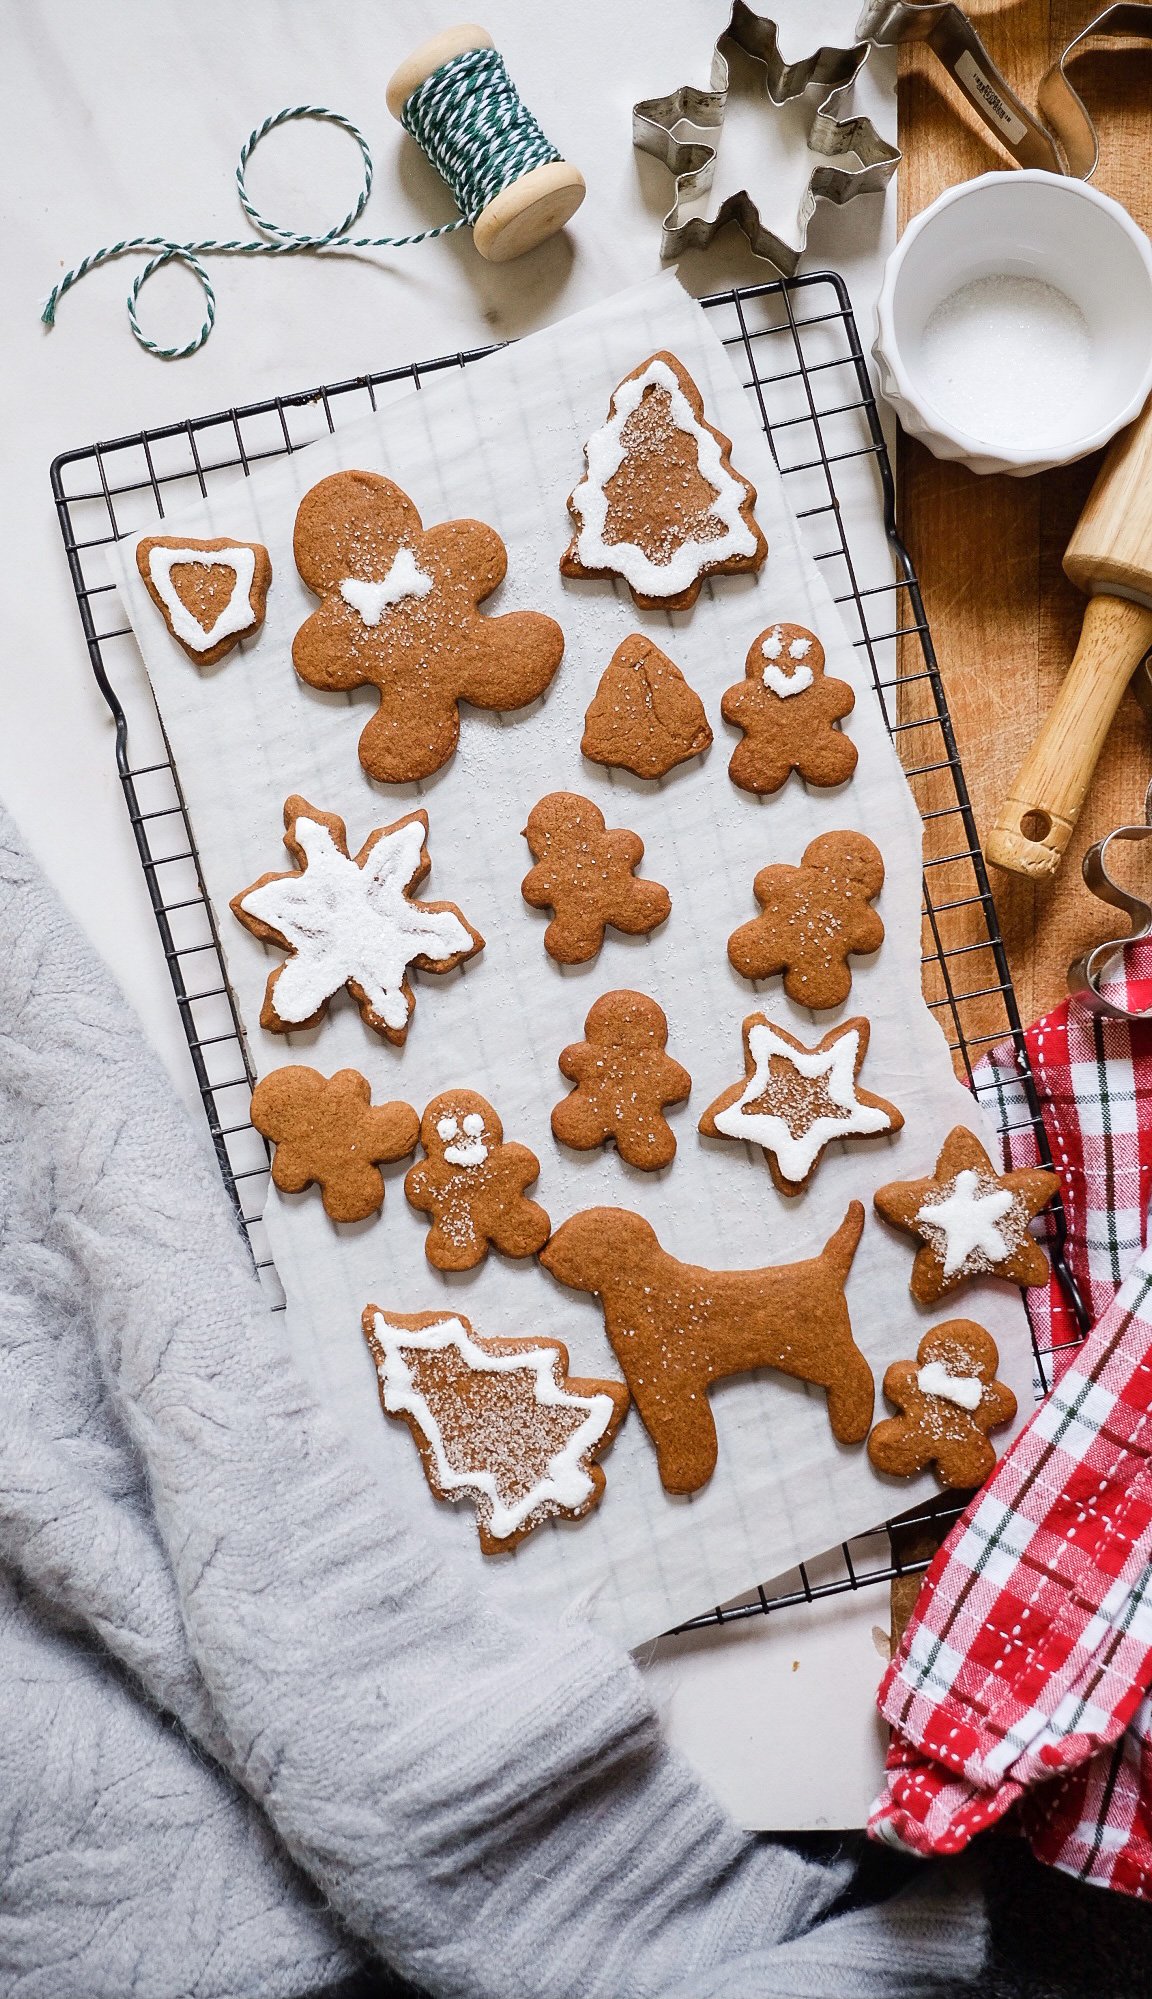 Lifestyle Blog Chocolate and Lace shares recipe for the best gingerbread cookies for cut out shapes.